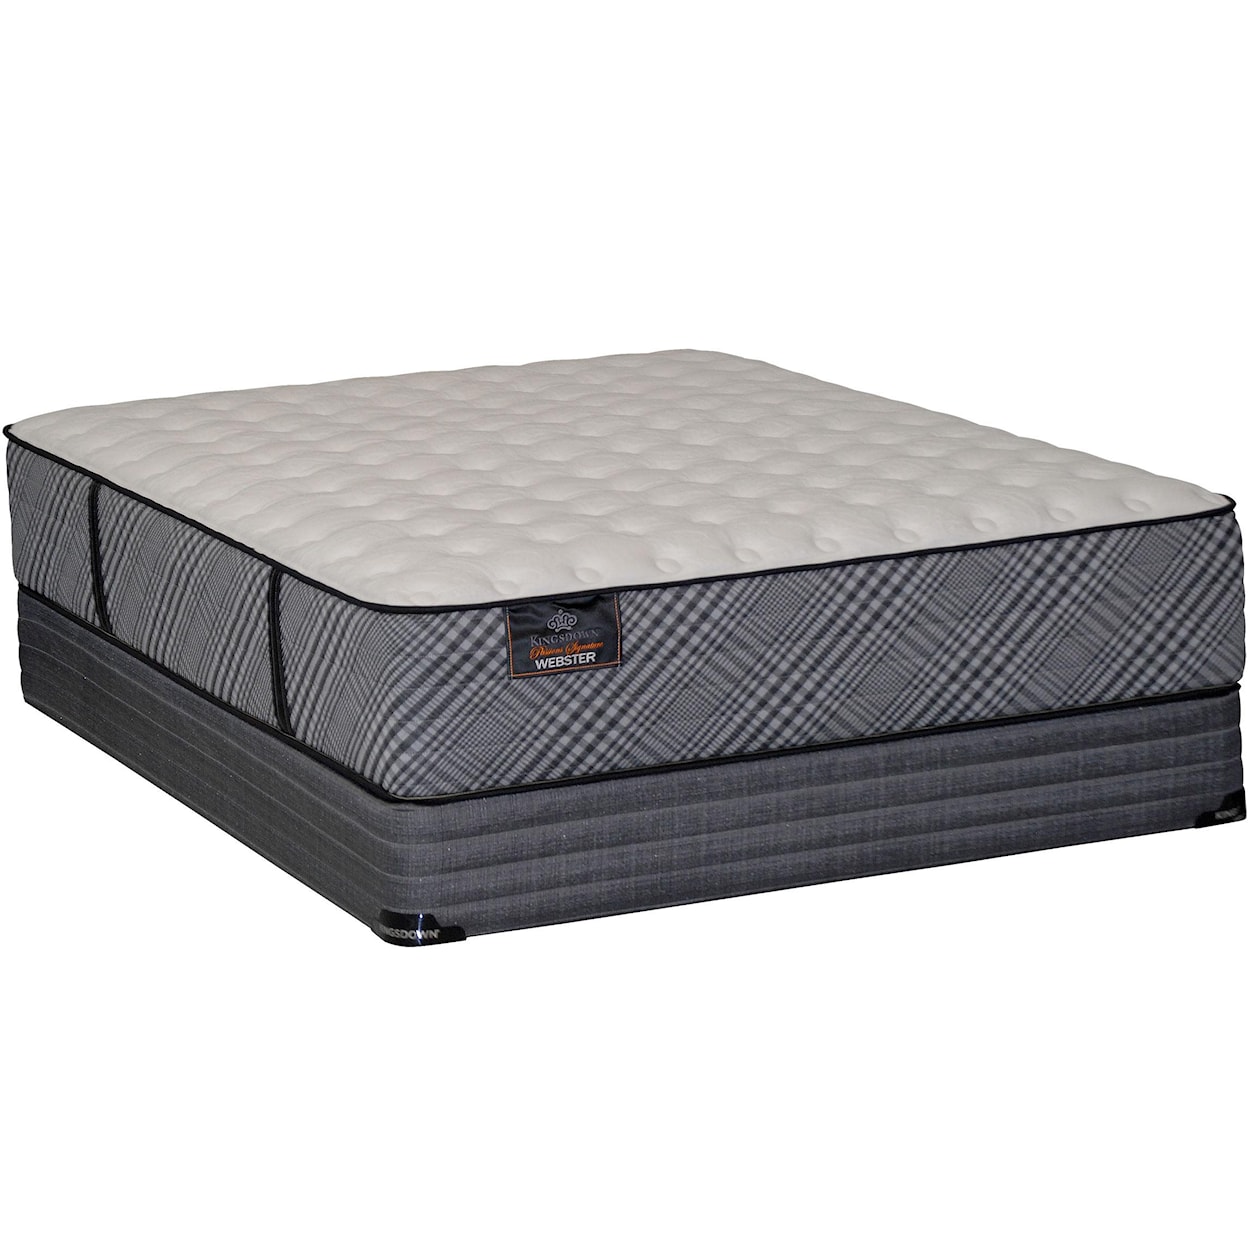 Kingsdown Passions Webster King Firm Mattress